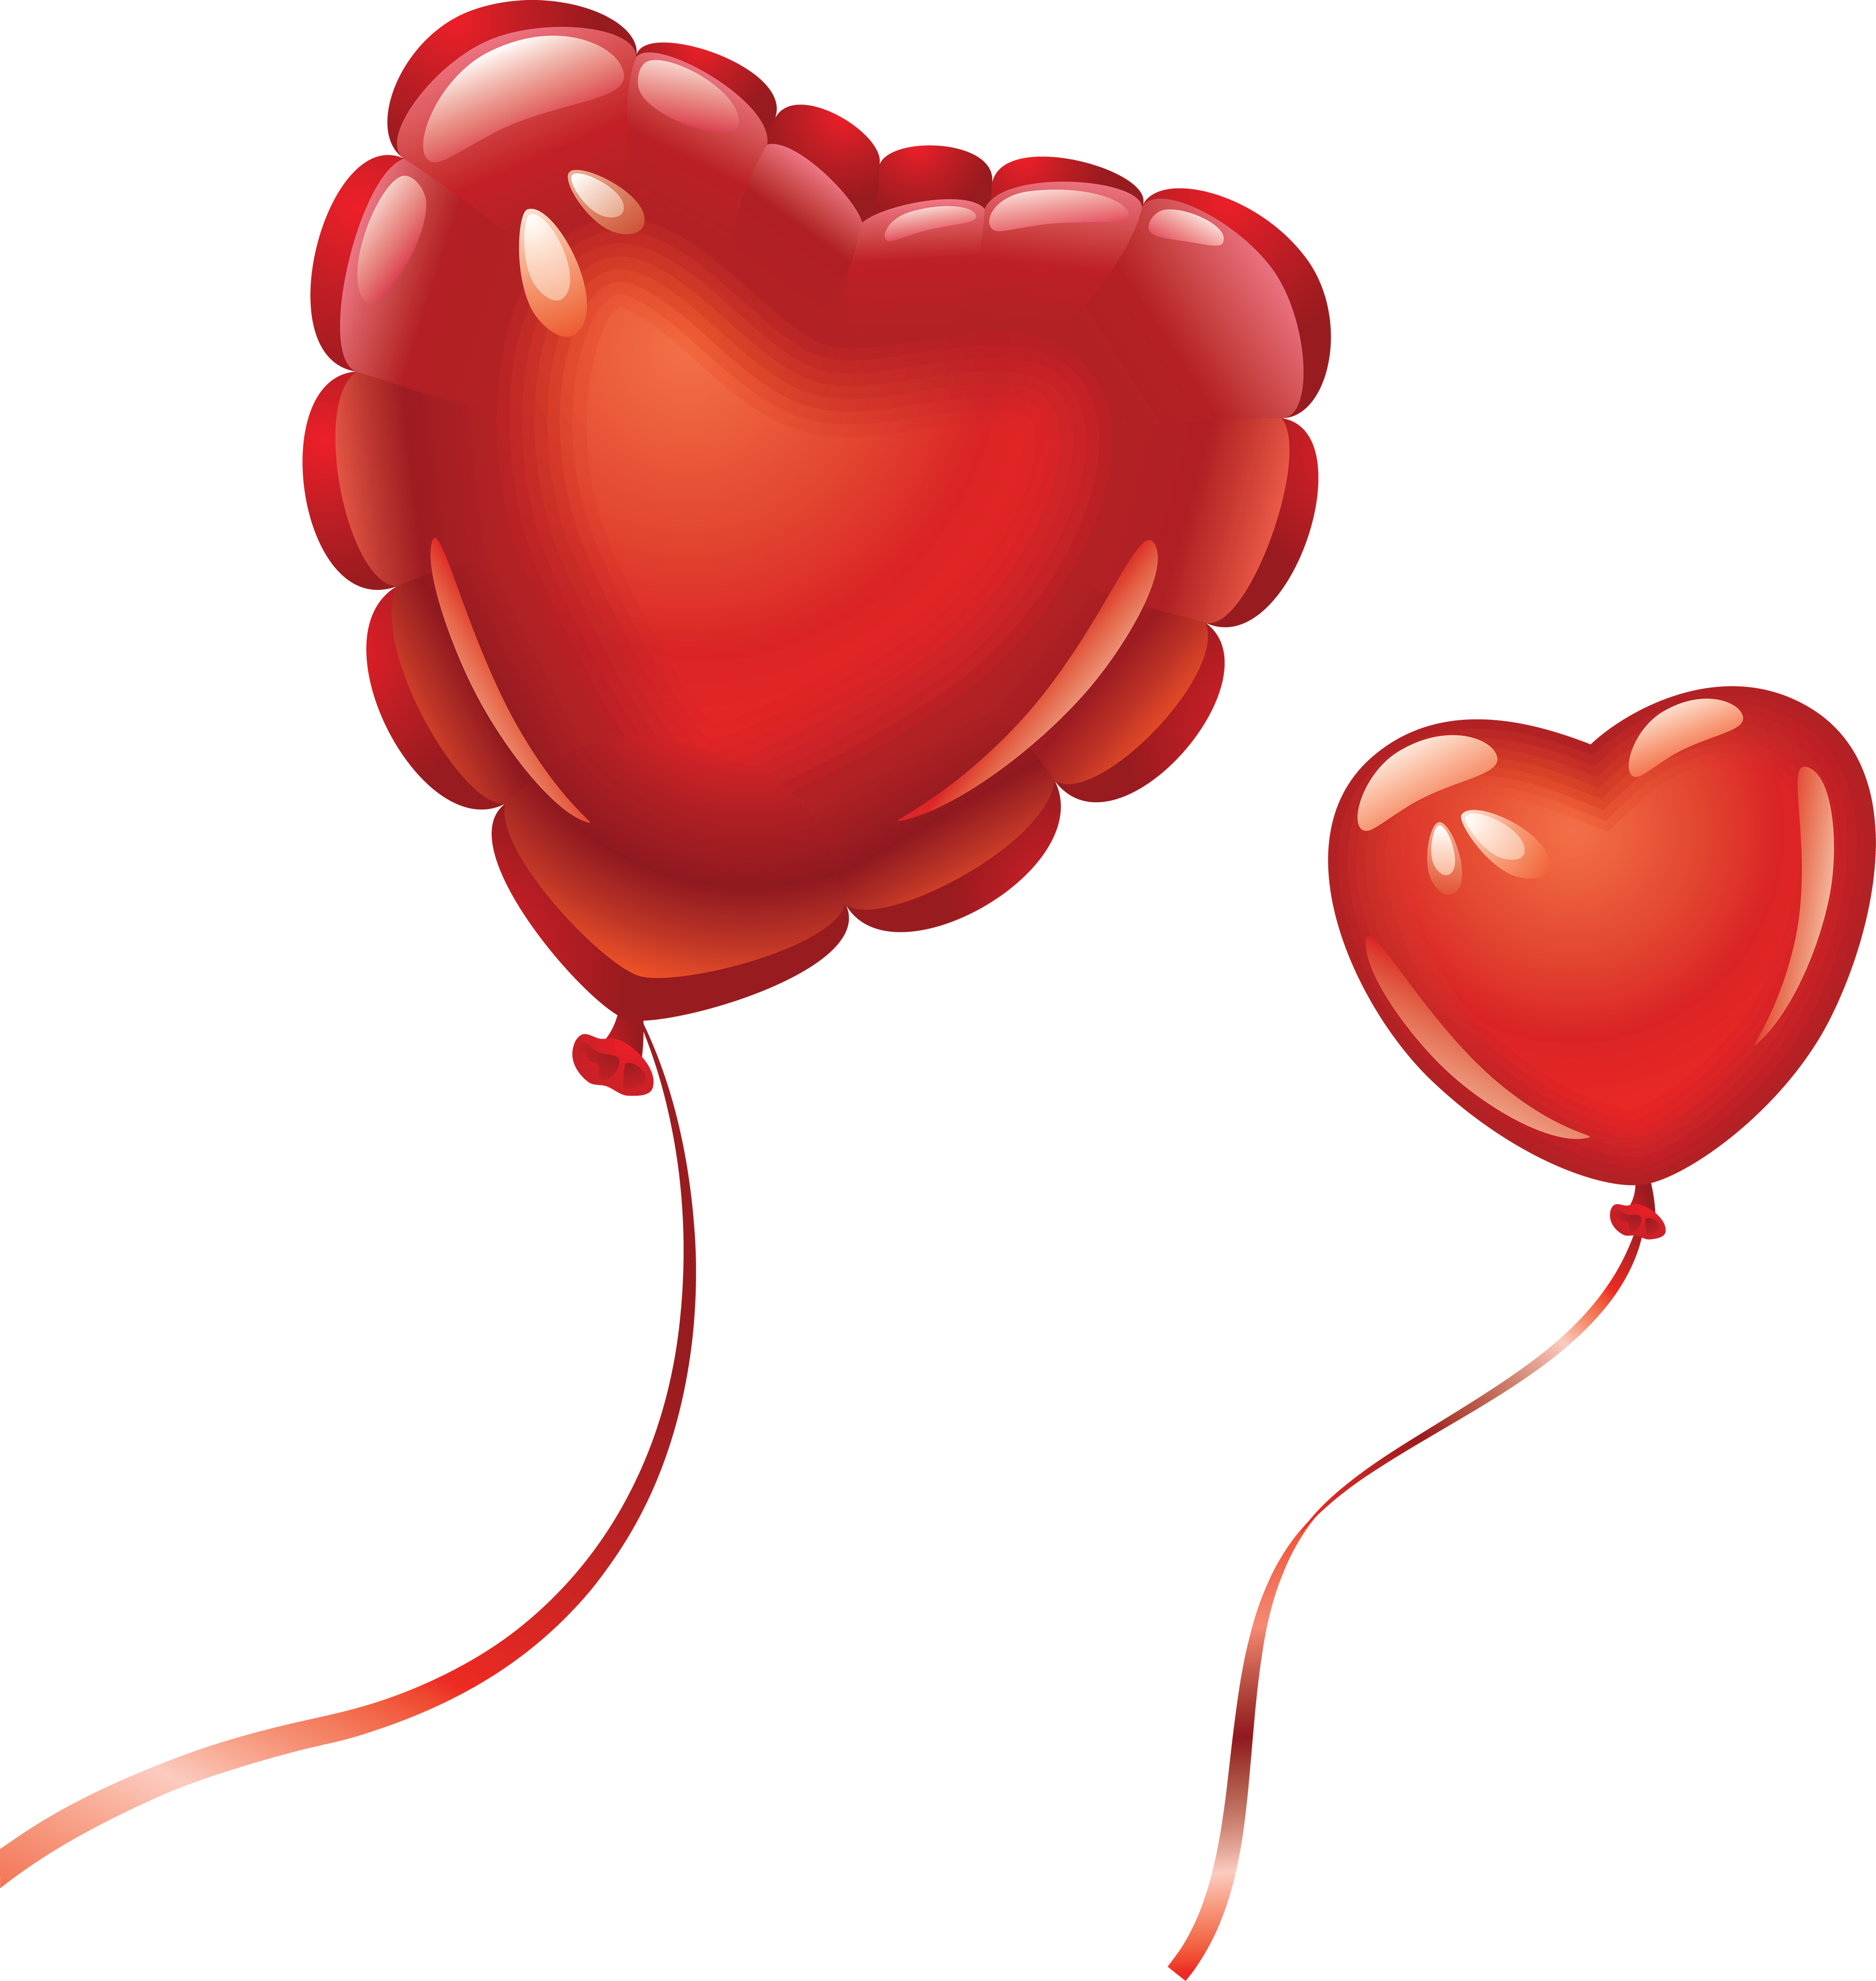 Heart Shaped Valentine Ballons PNG Image